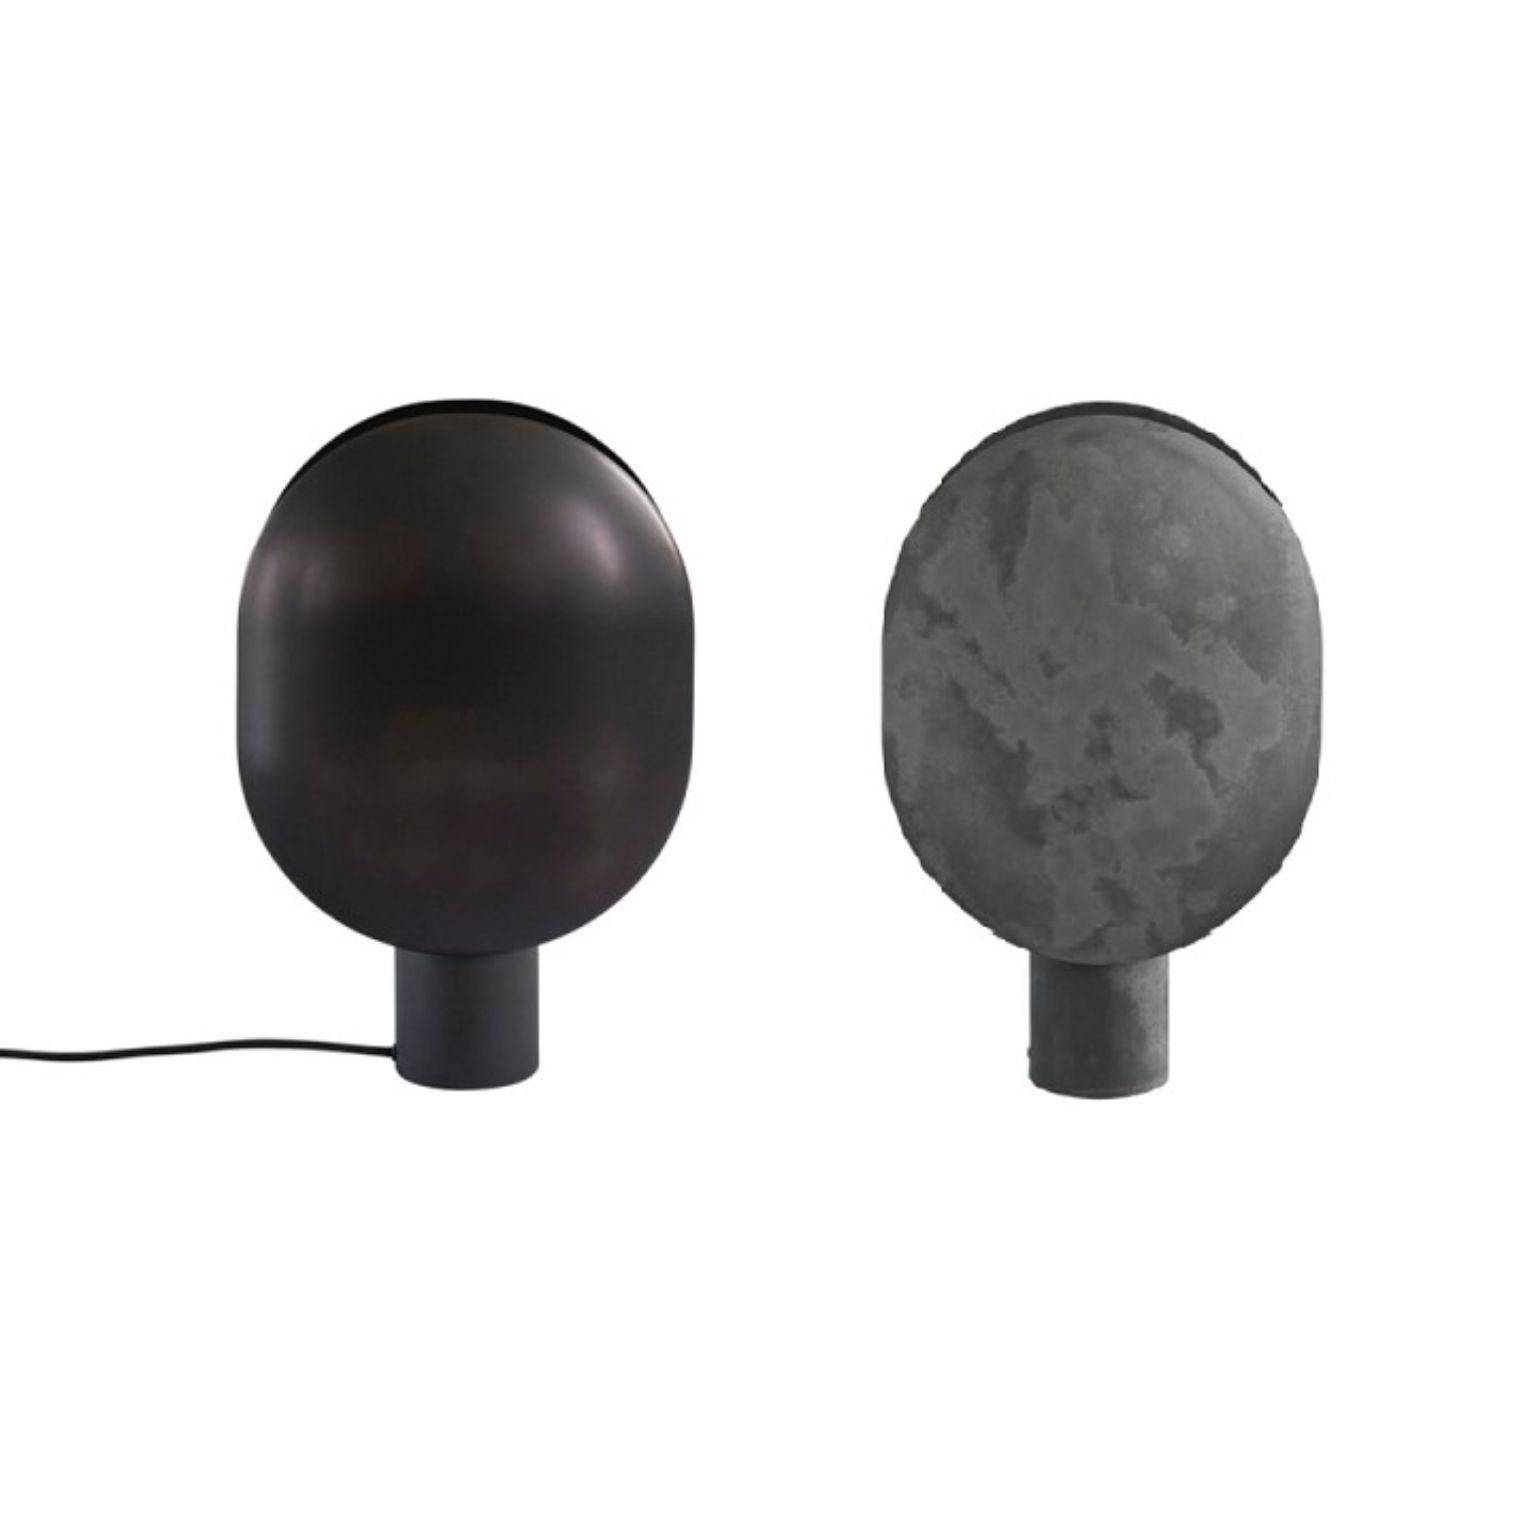 Set of 2 clam table lamps by 101 Copenhagen
Designed by Kristian Sofus Hansen & Tommy Hyldahl
Dimensions: L 30 x W 15 x H 43,5 cm
Cable length: 200 cm
This product is not wired for USA
Materials: Metal
Cable: Fabric covered cable /